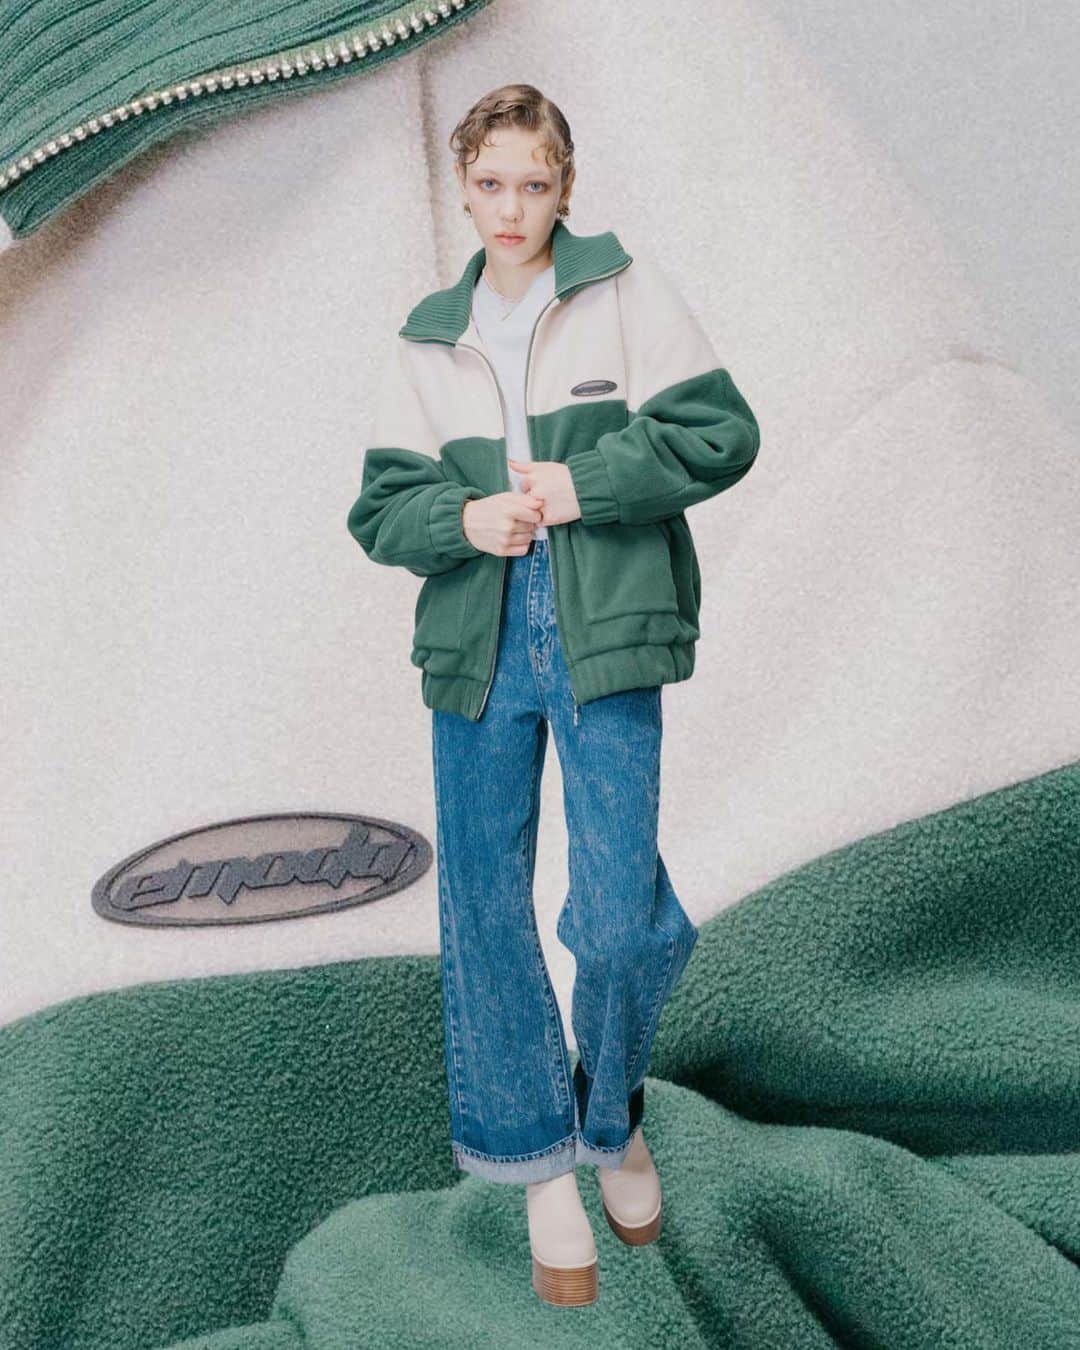 EMODAさんのインスタグラム写真 - (EMODAInstagram)「ㅤㅤㅤㅤㅤㅤㅤㅤㅤㅤㅤㅤ '23 autumn&winter October new item ㅤㅤㅤ  ・RIB COLLAR FLEECE BLOUSON ￥ 12,980 tax'in ・FRONT LOGO OVER T/S ￥ 5,940 tax'in ・2TONE LOOSE H/W JEANS ￥ 14,080 tax'in ・SIDE GORE ROUND BOOTS ￥ 16,280 tax'in ・MARK POINT PEARL NC ￥ 4,950 tax'in ・MARK POINT PIERCE ￥ 3,960 tax'in ＿＿＿＿＿＿＿＿＿＿＿＿＿＿＿＿＿＿＿＿＿＿＿＿  詳細は( @emoda_official )のTOPのURL,storiesチェック✔️ㅤㅤ ㅤㅤㅤ ㅤㅤㅤㅤㅤ ㅤㅤㅤㅤㅤ ㅤㅤㅤㅤ #EMODA #EMODA_OUTER #EMODA_JEANS #EMODA_SHOES #boots #フリースブルゾン #フリース #オーバーサイズブルゾン #ロゴロンT #ロングスリーブロンT #ワイドデニム #ルーズデニム #ショートブーツ #RUNWAYchannel #2023AW #autumn #winter @emoda_snap」10月11日 18時44分 - emoda_official